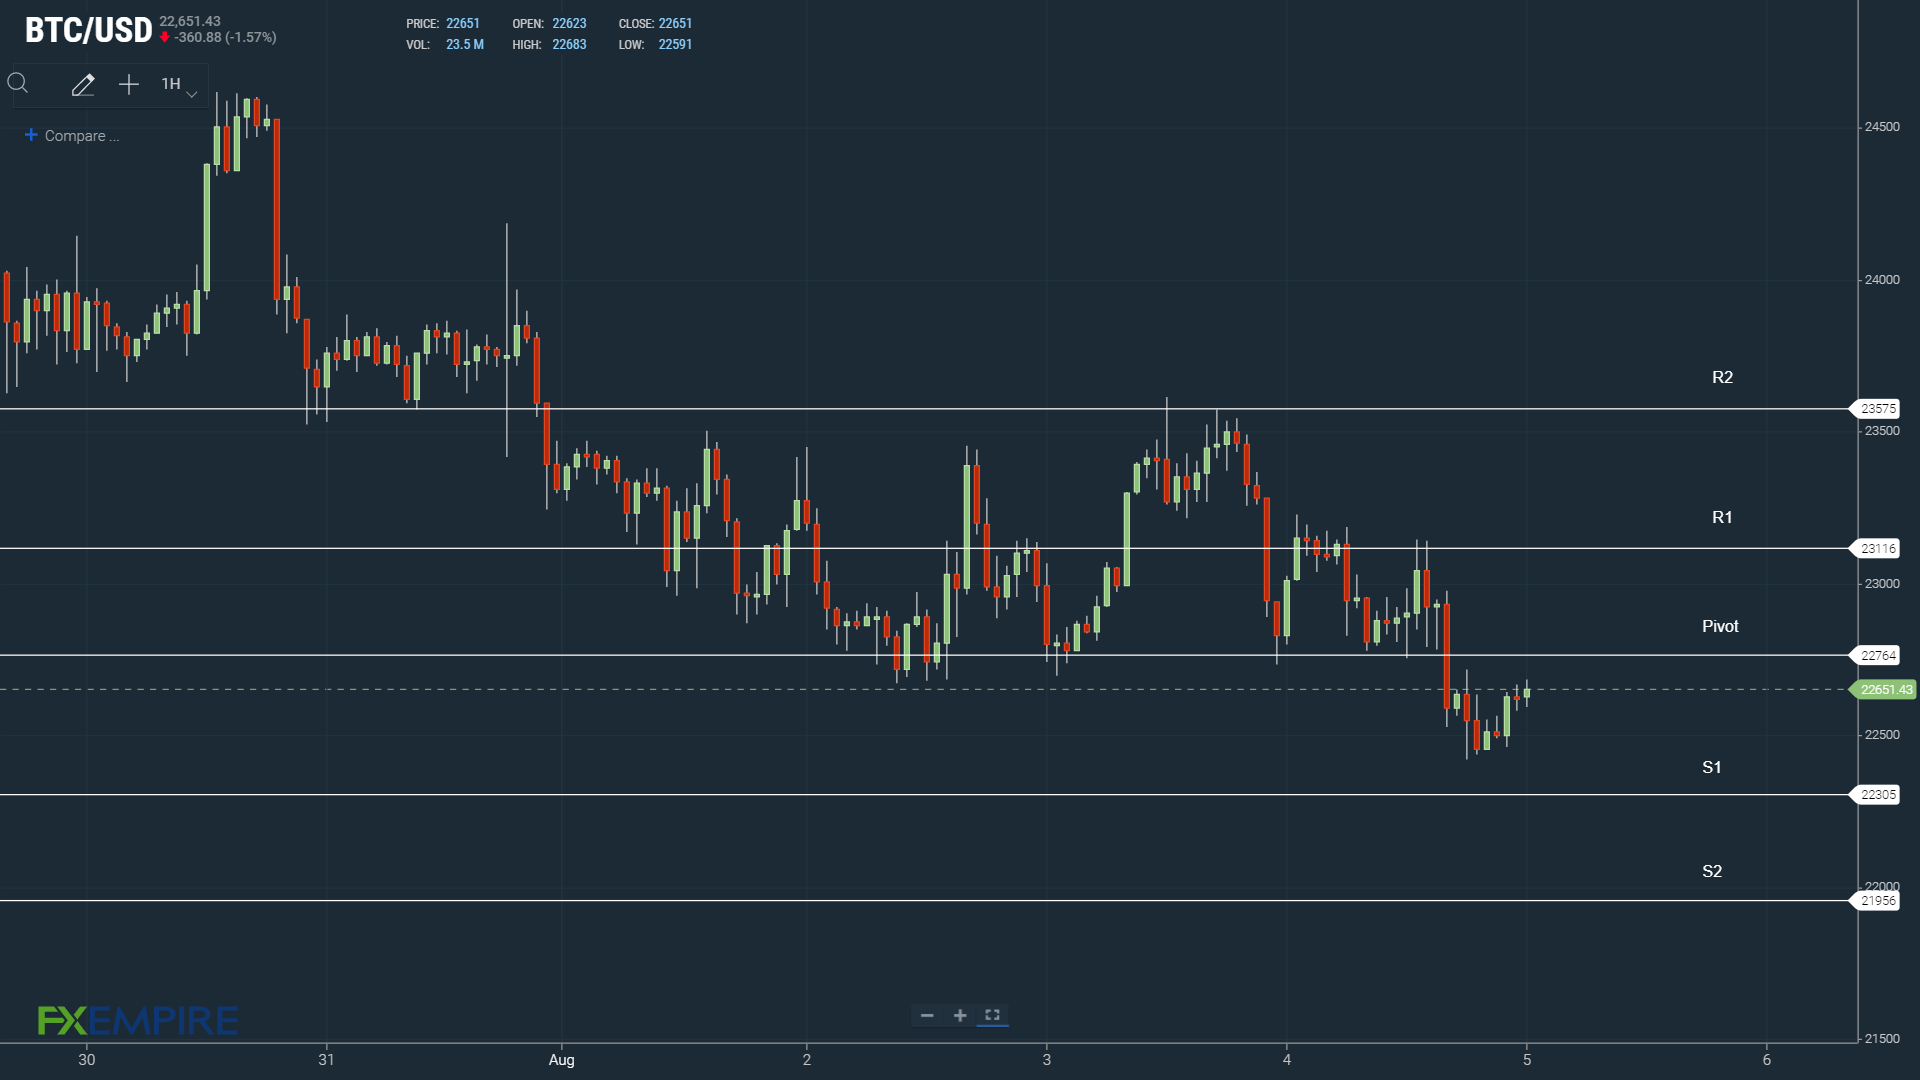 BTC support levels in play